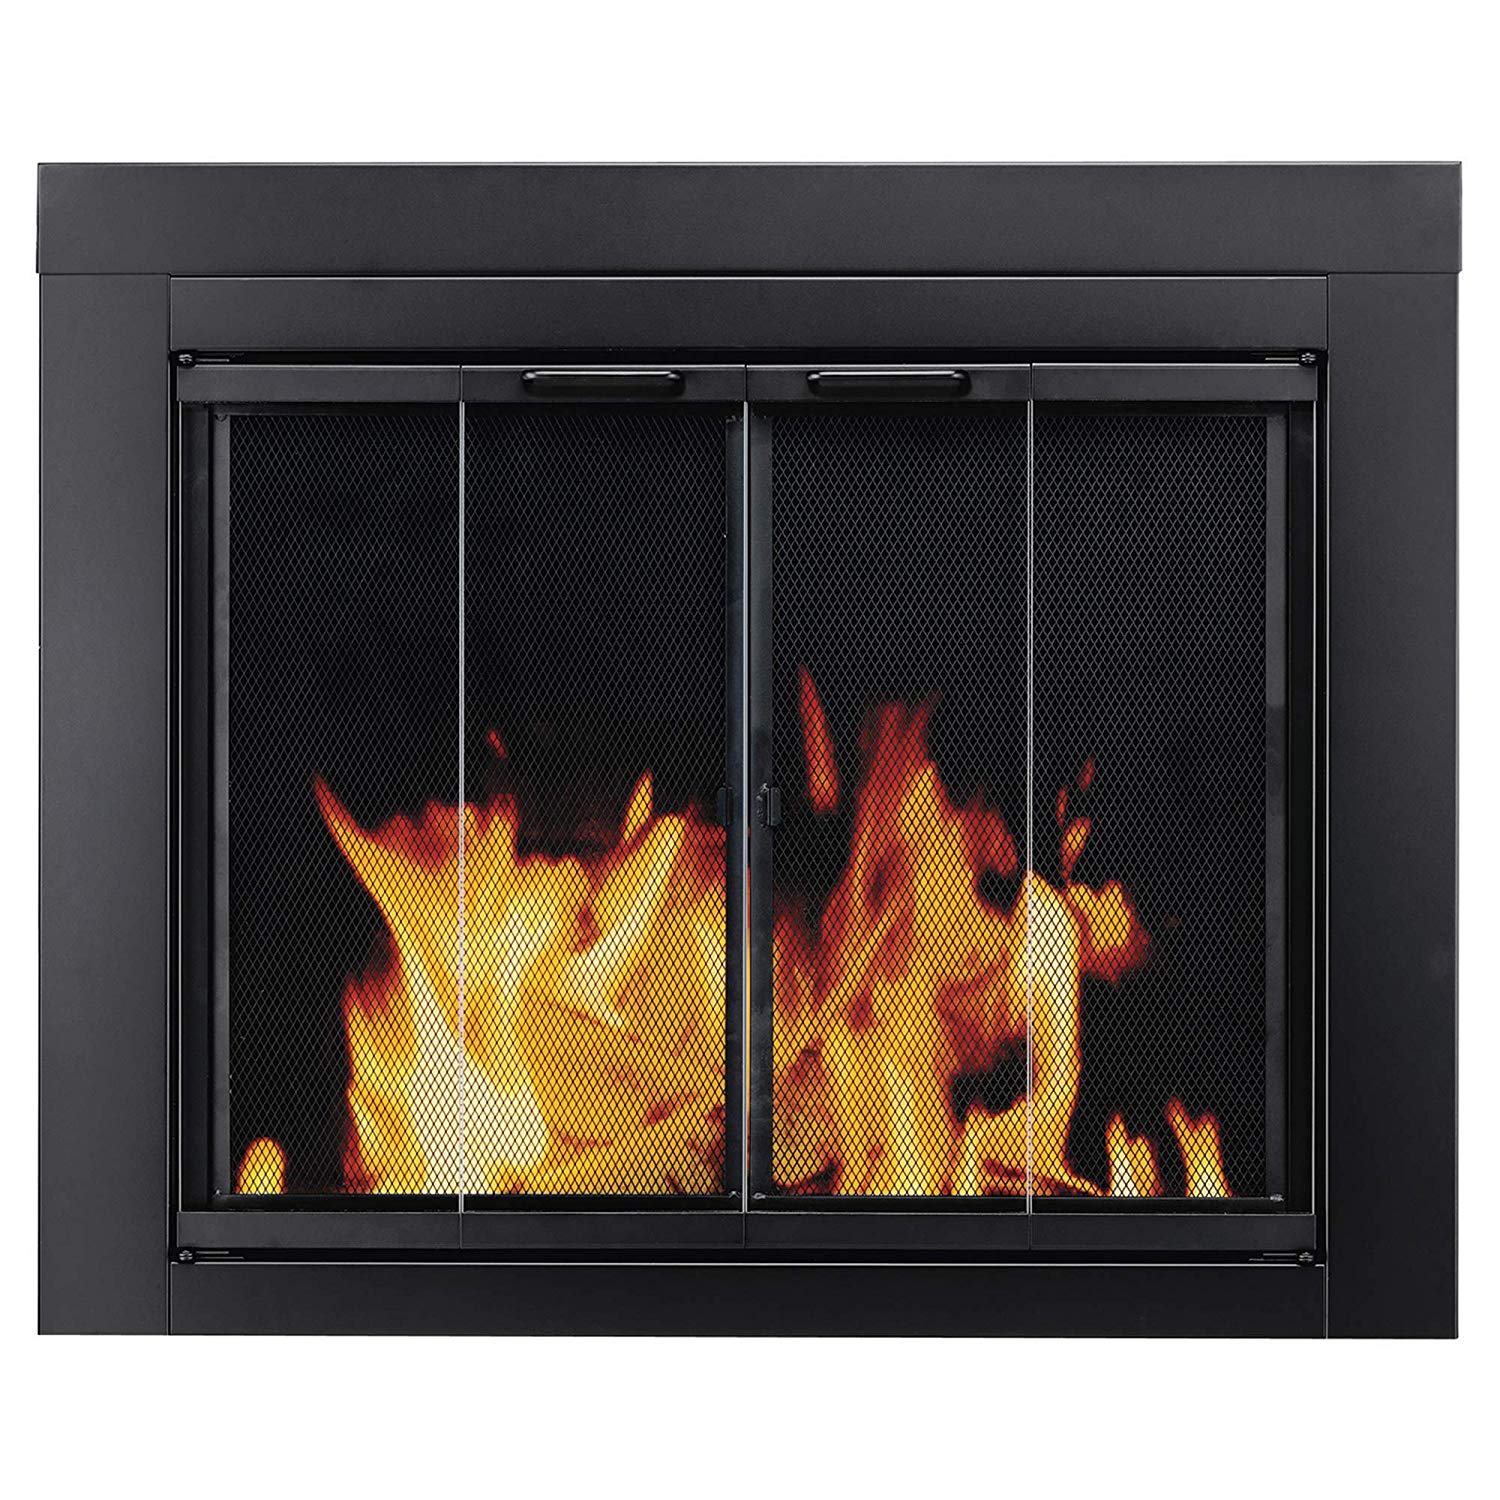 Frame for Fireplace Fresh Pleasant Hearth at 1000 ascot Fireplace Glass Door Black Small